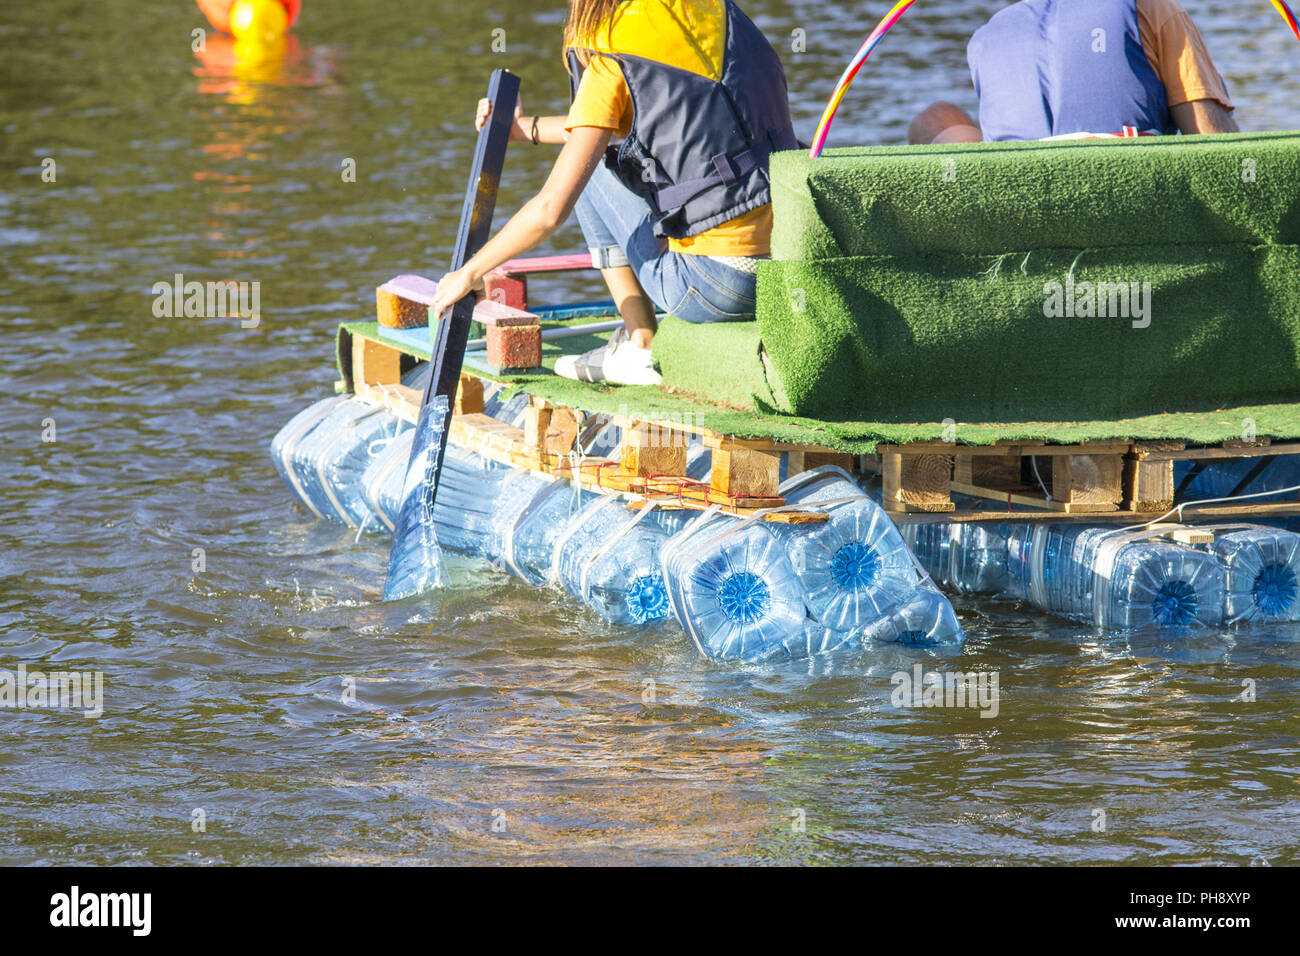 https://c8.alamy.com/comp/PH8XYP/rafts-made-of-recycled-plastic-bottels-to-teach-reuse-PH8XYP.jpg